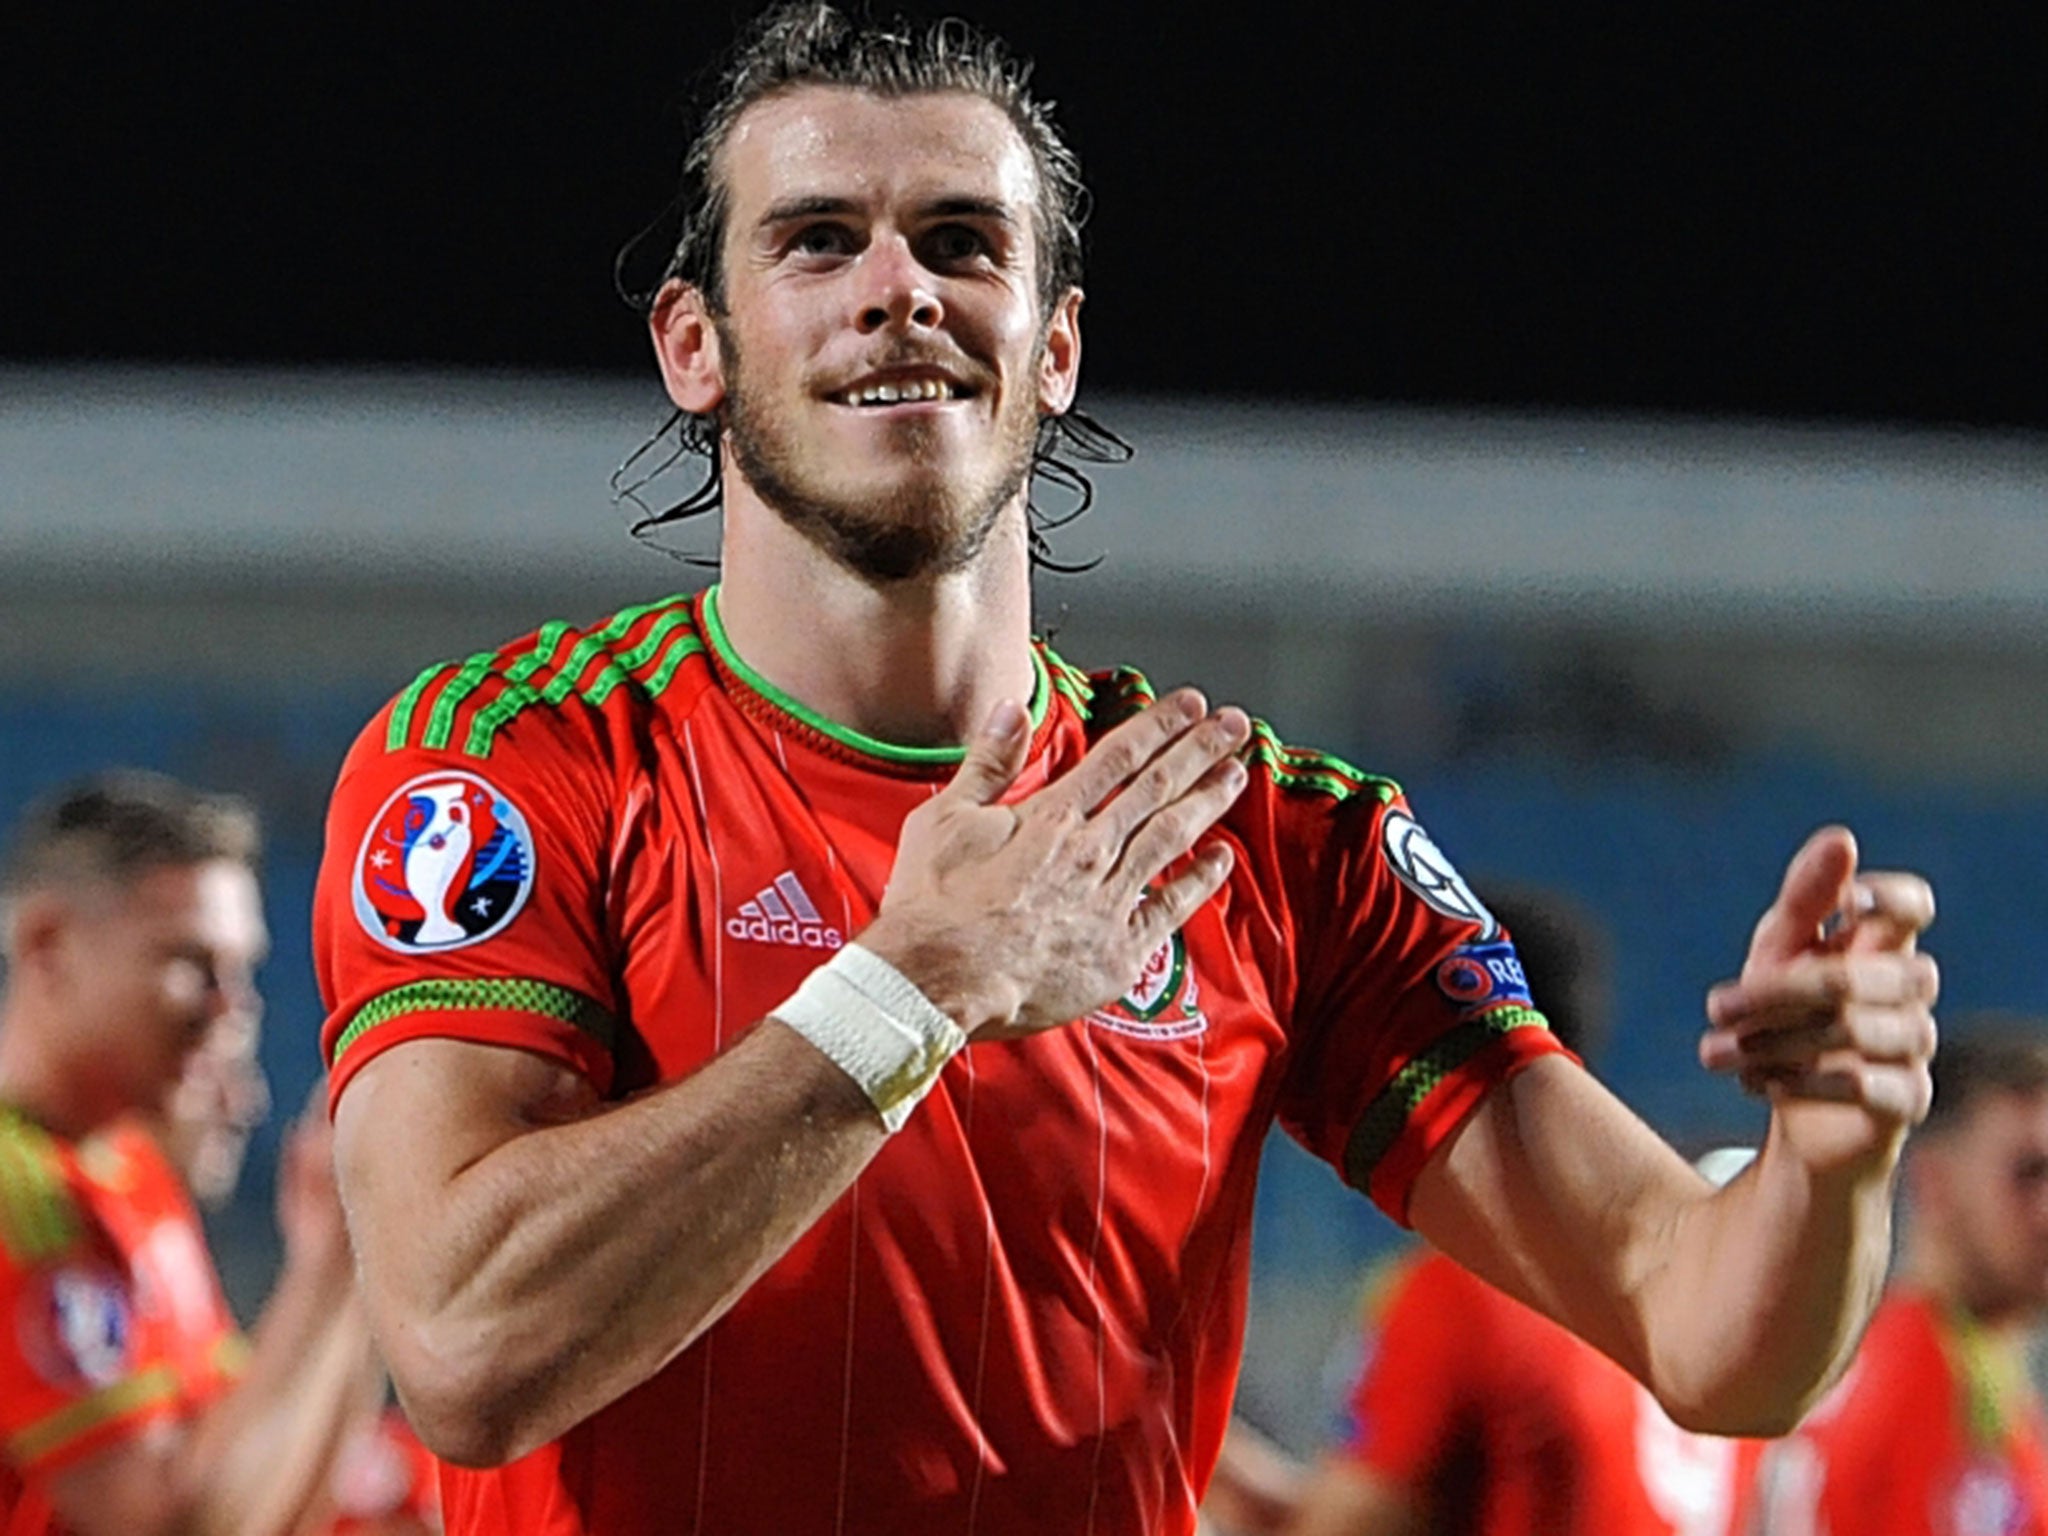 It would be nice if the mighty Gareth Bale and chums would throw their lot in with England